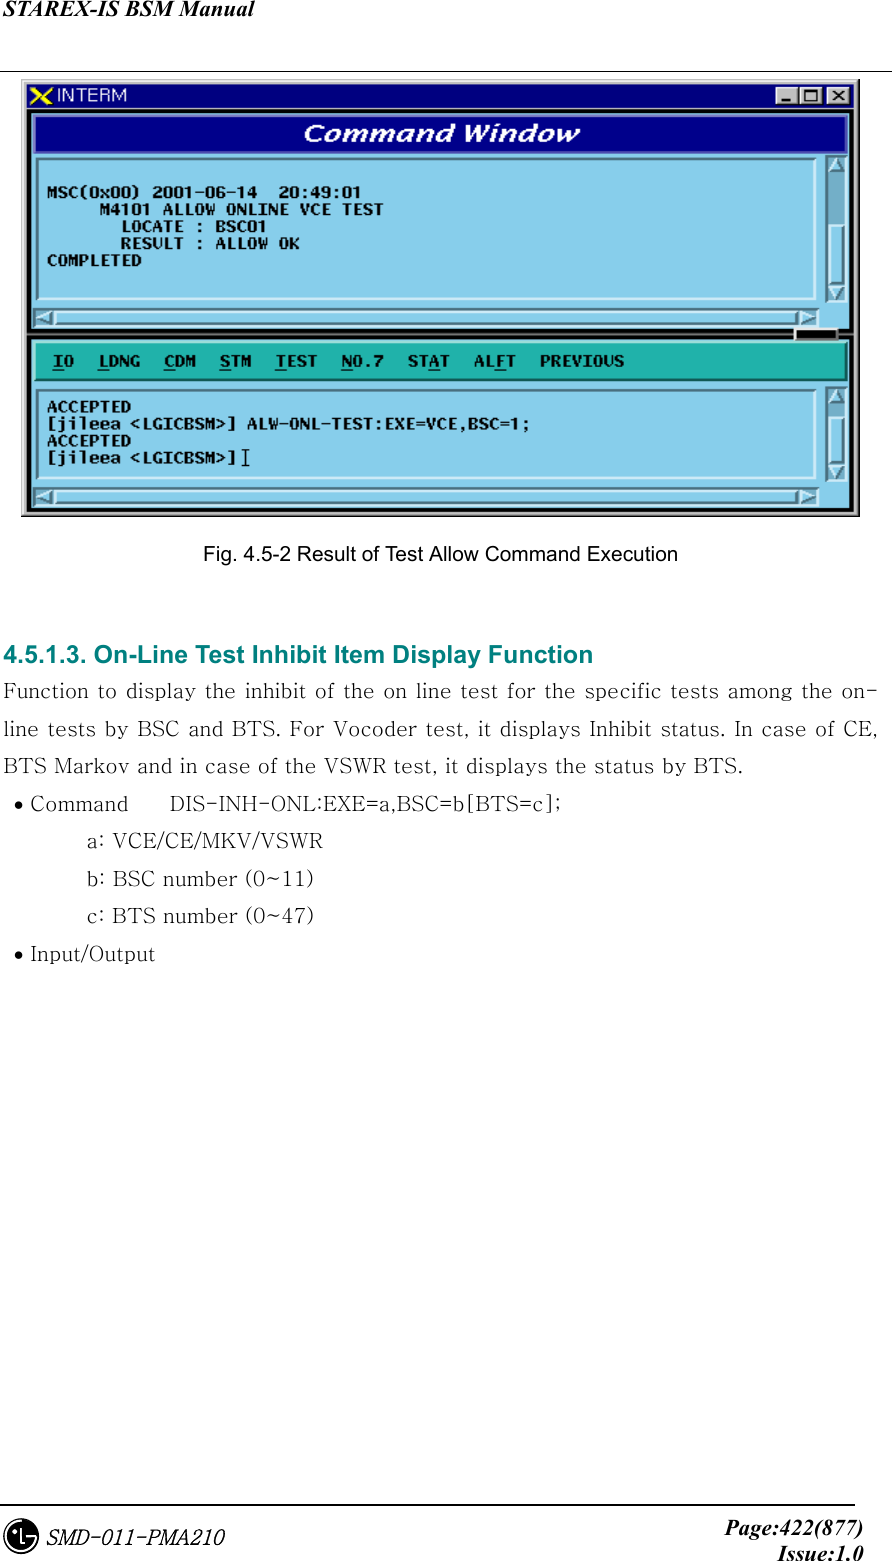 STAREX-IS BSM Manual     Page:422(877)Issue:1.0SMD-011-PMA210  Fig. 4.5-2 Result of Test Allow Command Execution  4.5.1.3. On-Line Test Inhibit Item Display Function Function to display the inhibit of the on line test for the specific tests among the on-line tests by BSC and BTS. For Vocoder test, it displays Inhibit status. In case of CE, BTS Markov and in case of the VSWR test, it displays the status by BTS.  • Command  DIS-INH-ONL:EXE=a,BSC=b[BTS=c];   a: VCE/CE/MKV/VSWR   b: BSC number (0~11)   c: BTS number (0~47)  • Input/Output 